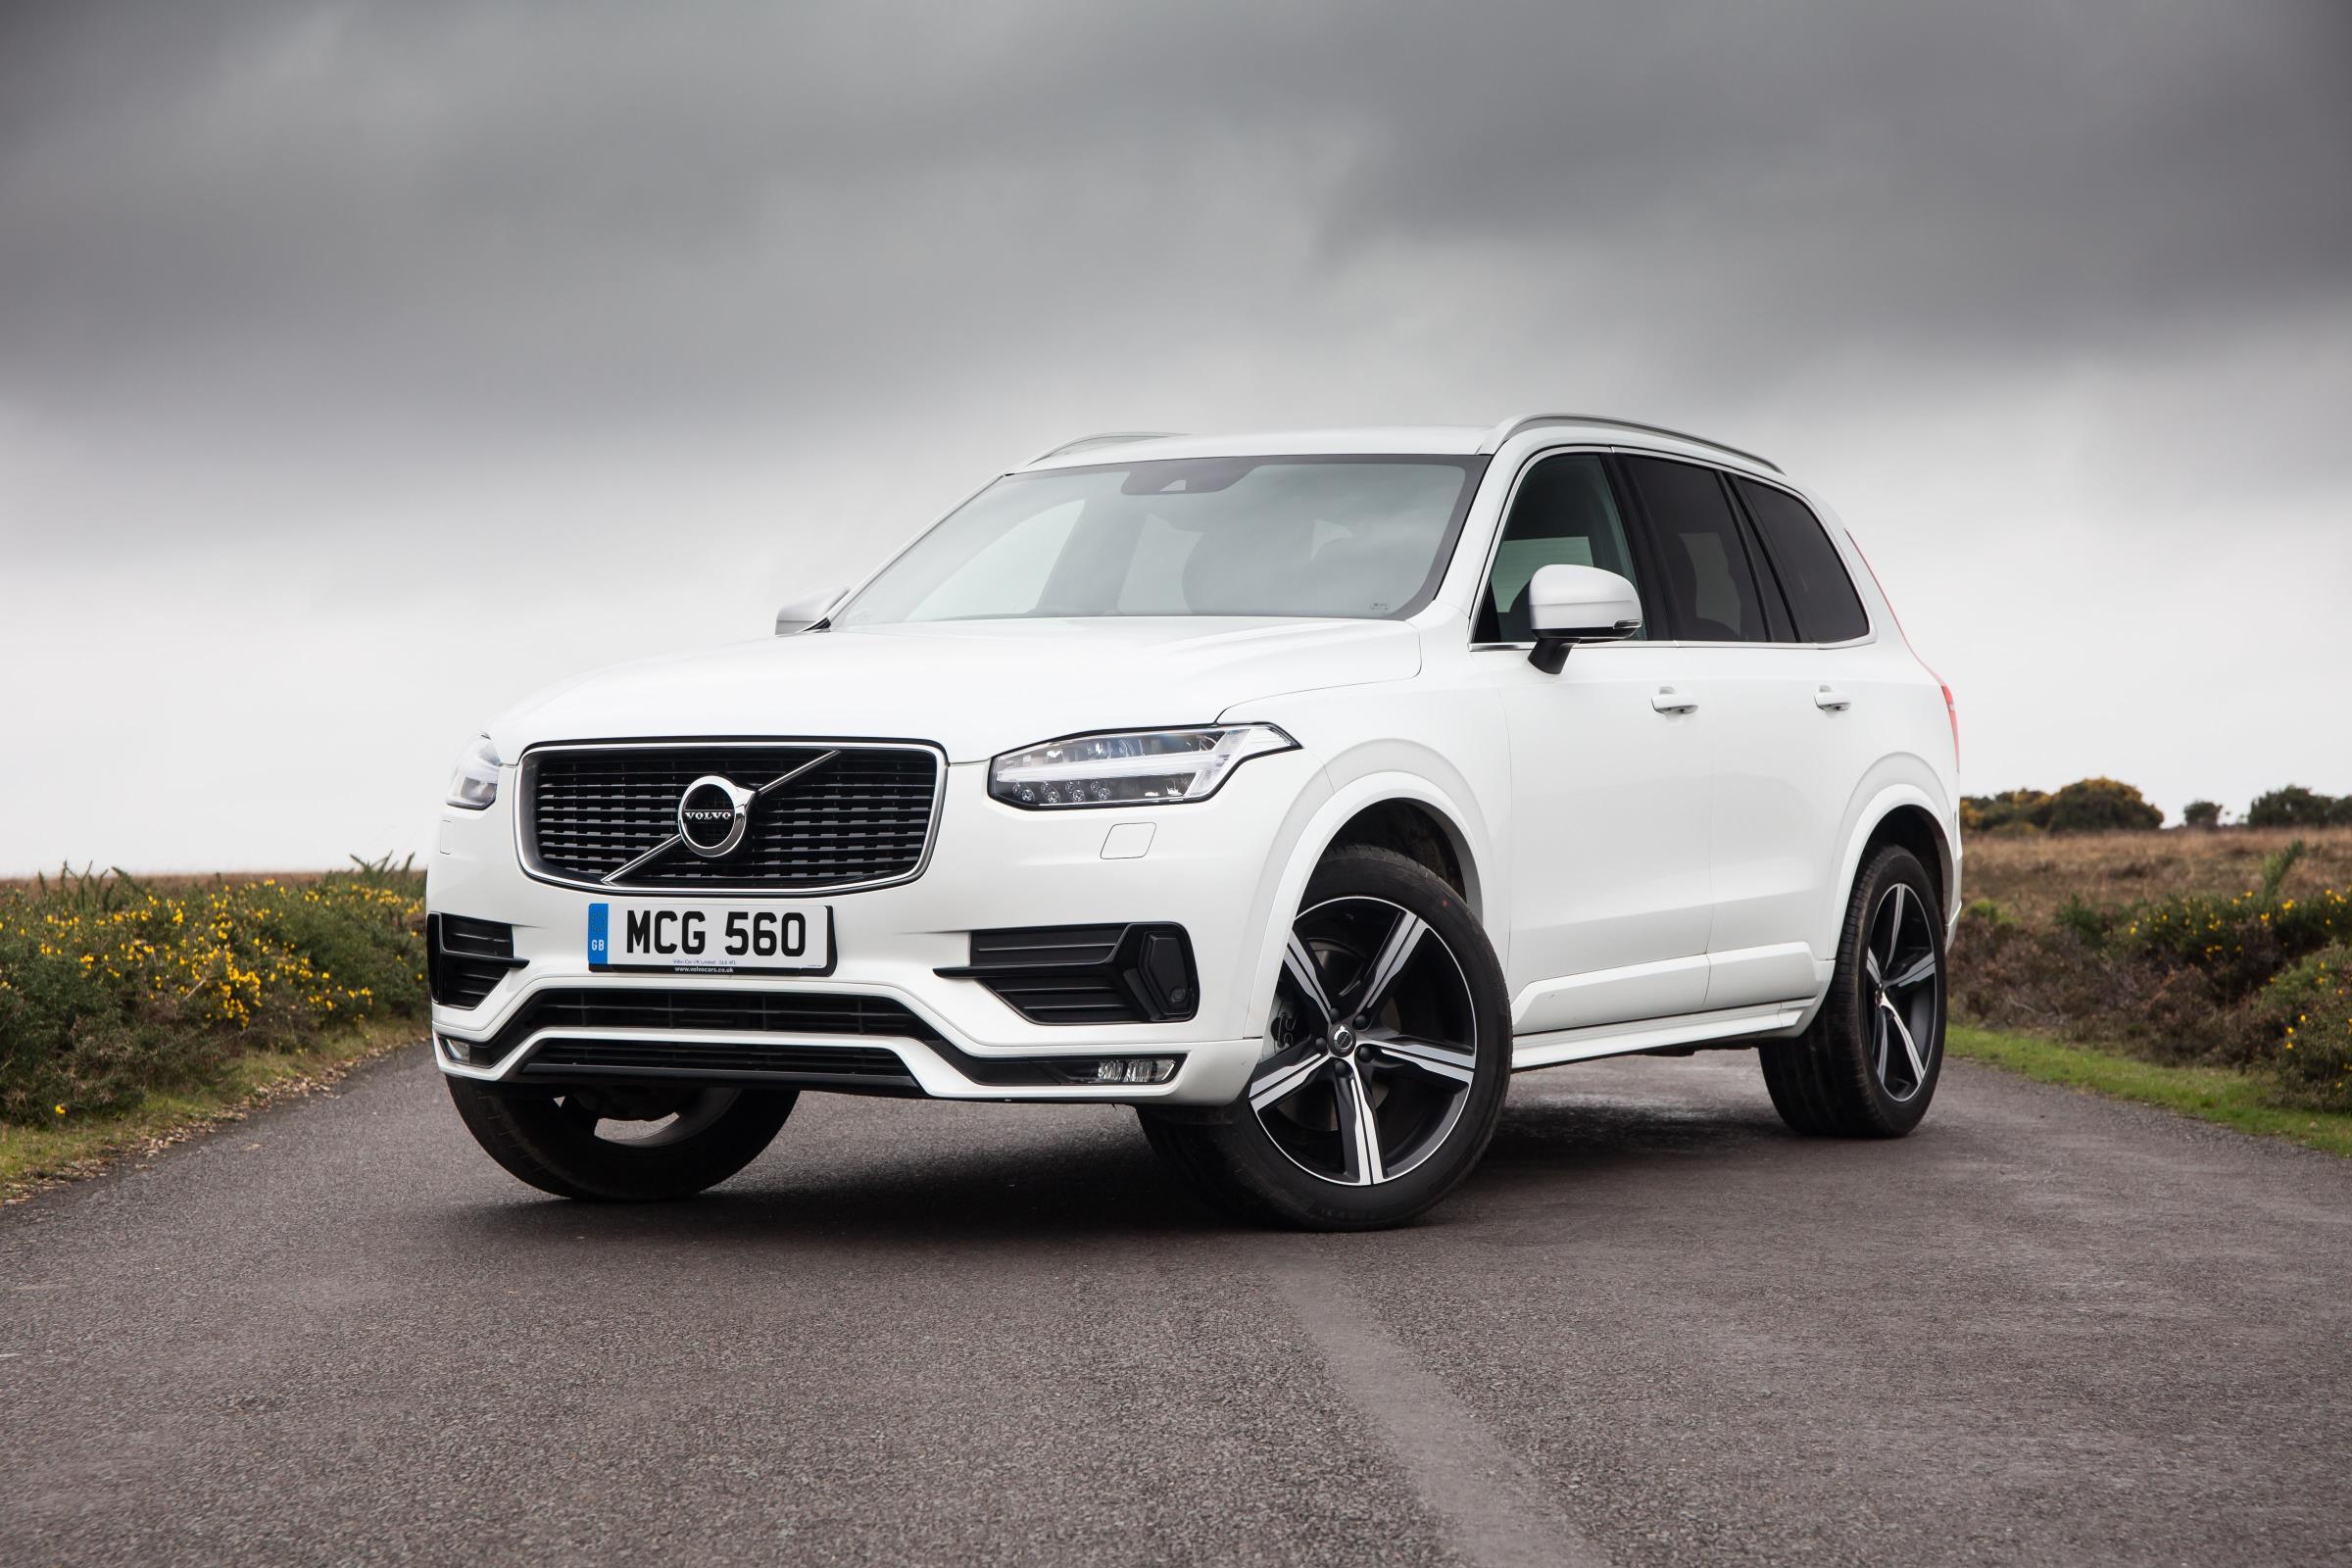 Volvo introduces T5 V90 CC and XC90 in the UK